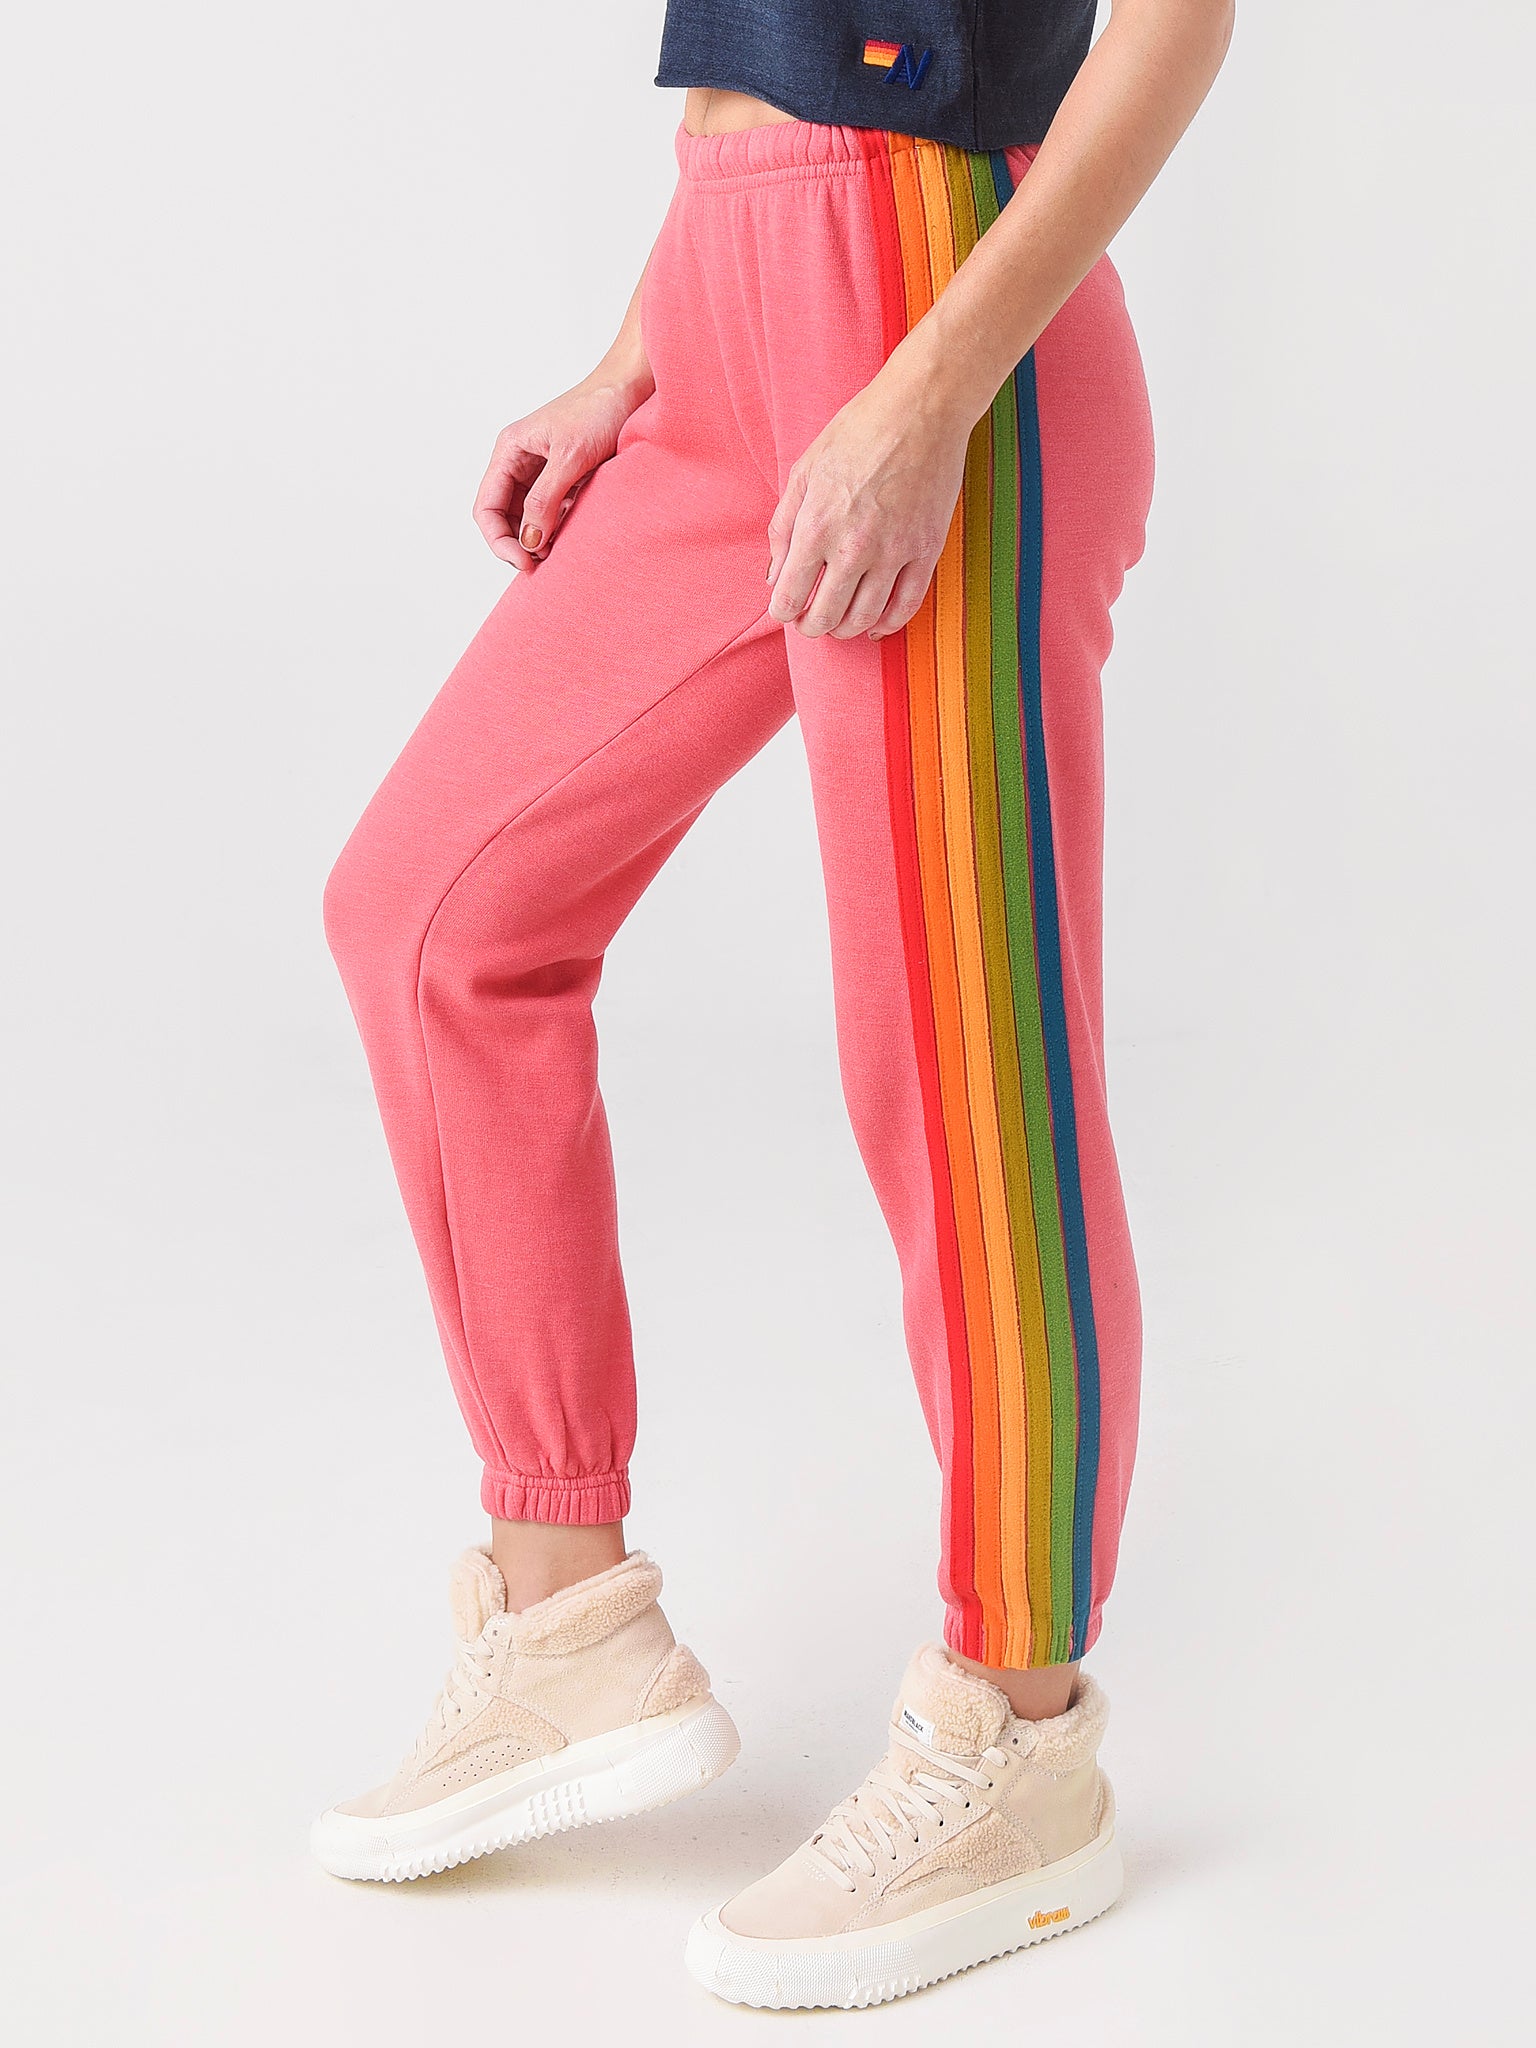 Aviator Nation 6 Stripe Blush Pink Sweatpants - SOLD OUT - Athletic apparel